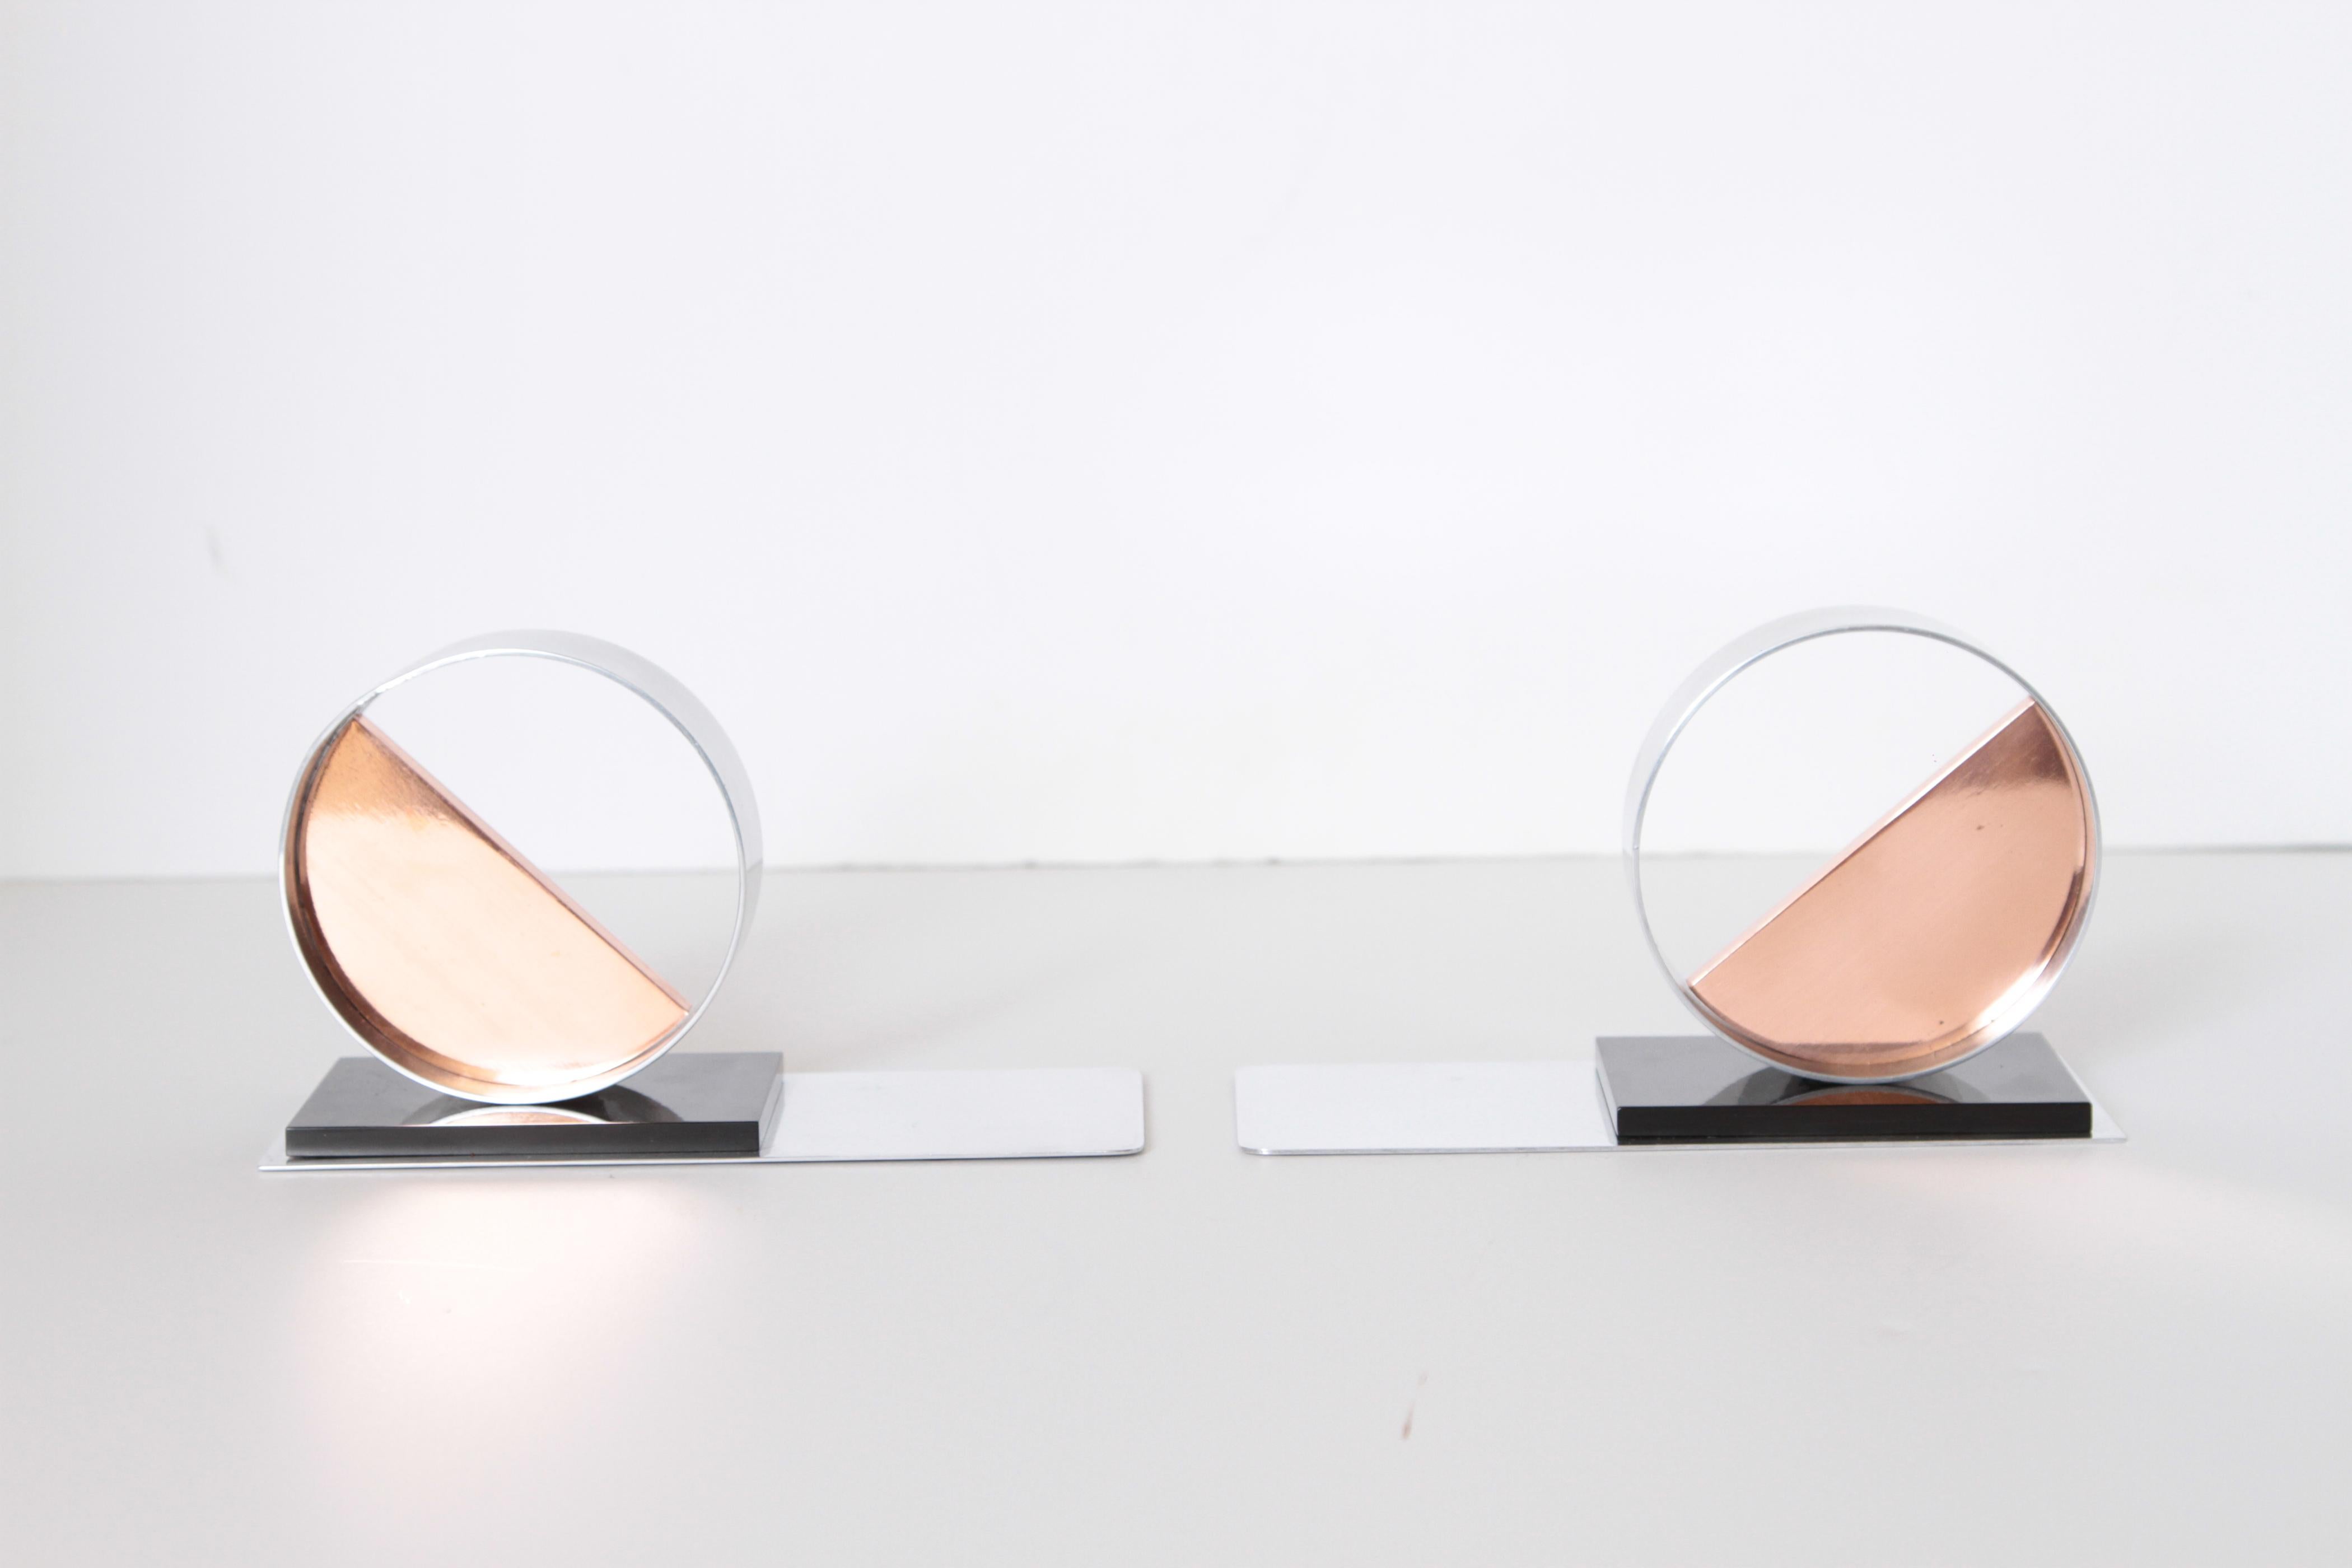 Modernist Machine Age Art Deco sculptures / bookends pair copper chrome Bakelite Catalin.

Nice geometric form in mixed materials.
Similar quality to Chase, Revere and Manning Bowman designs.

Good vintage used condition, copper half-discs appear to